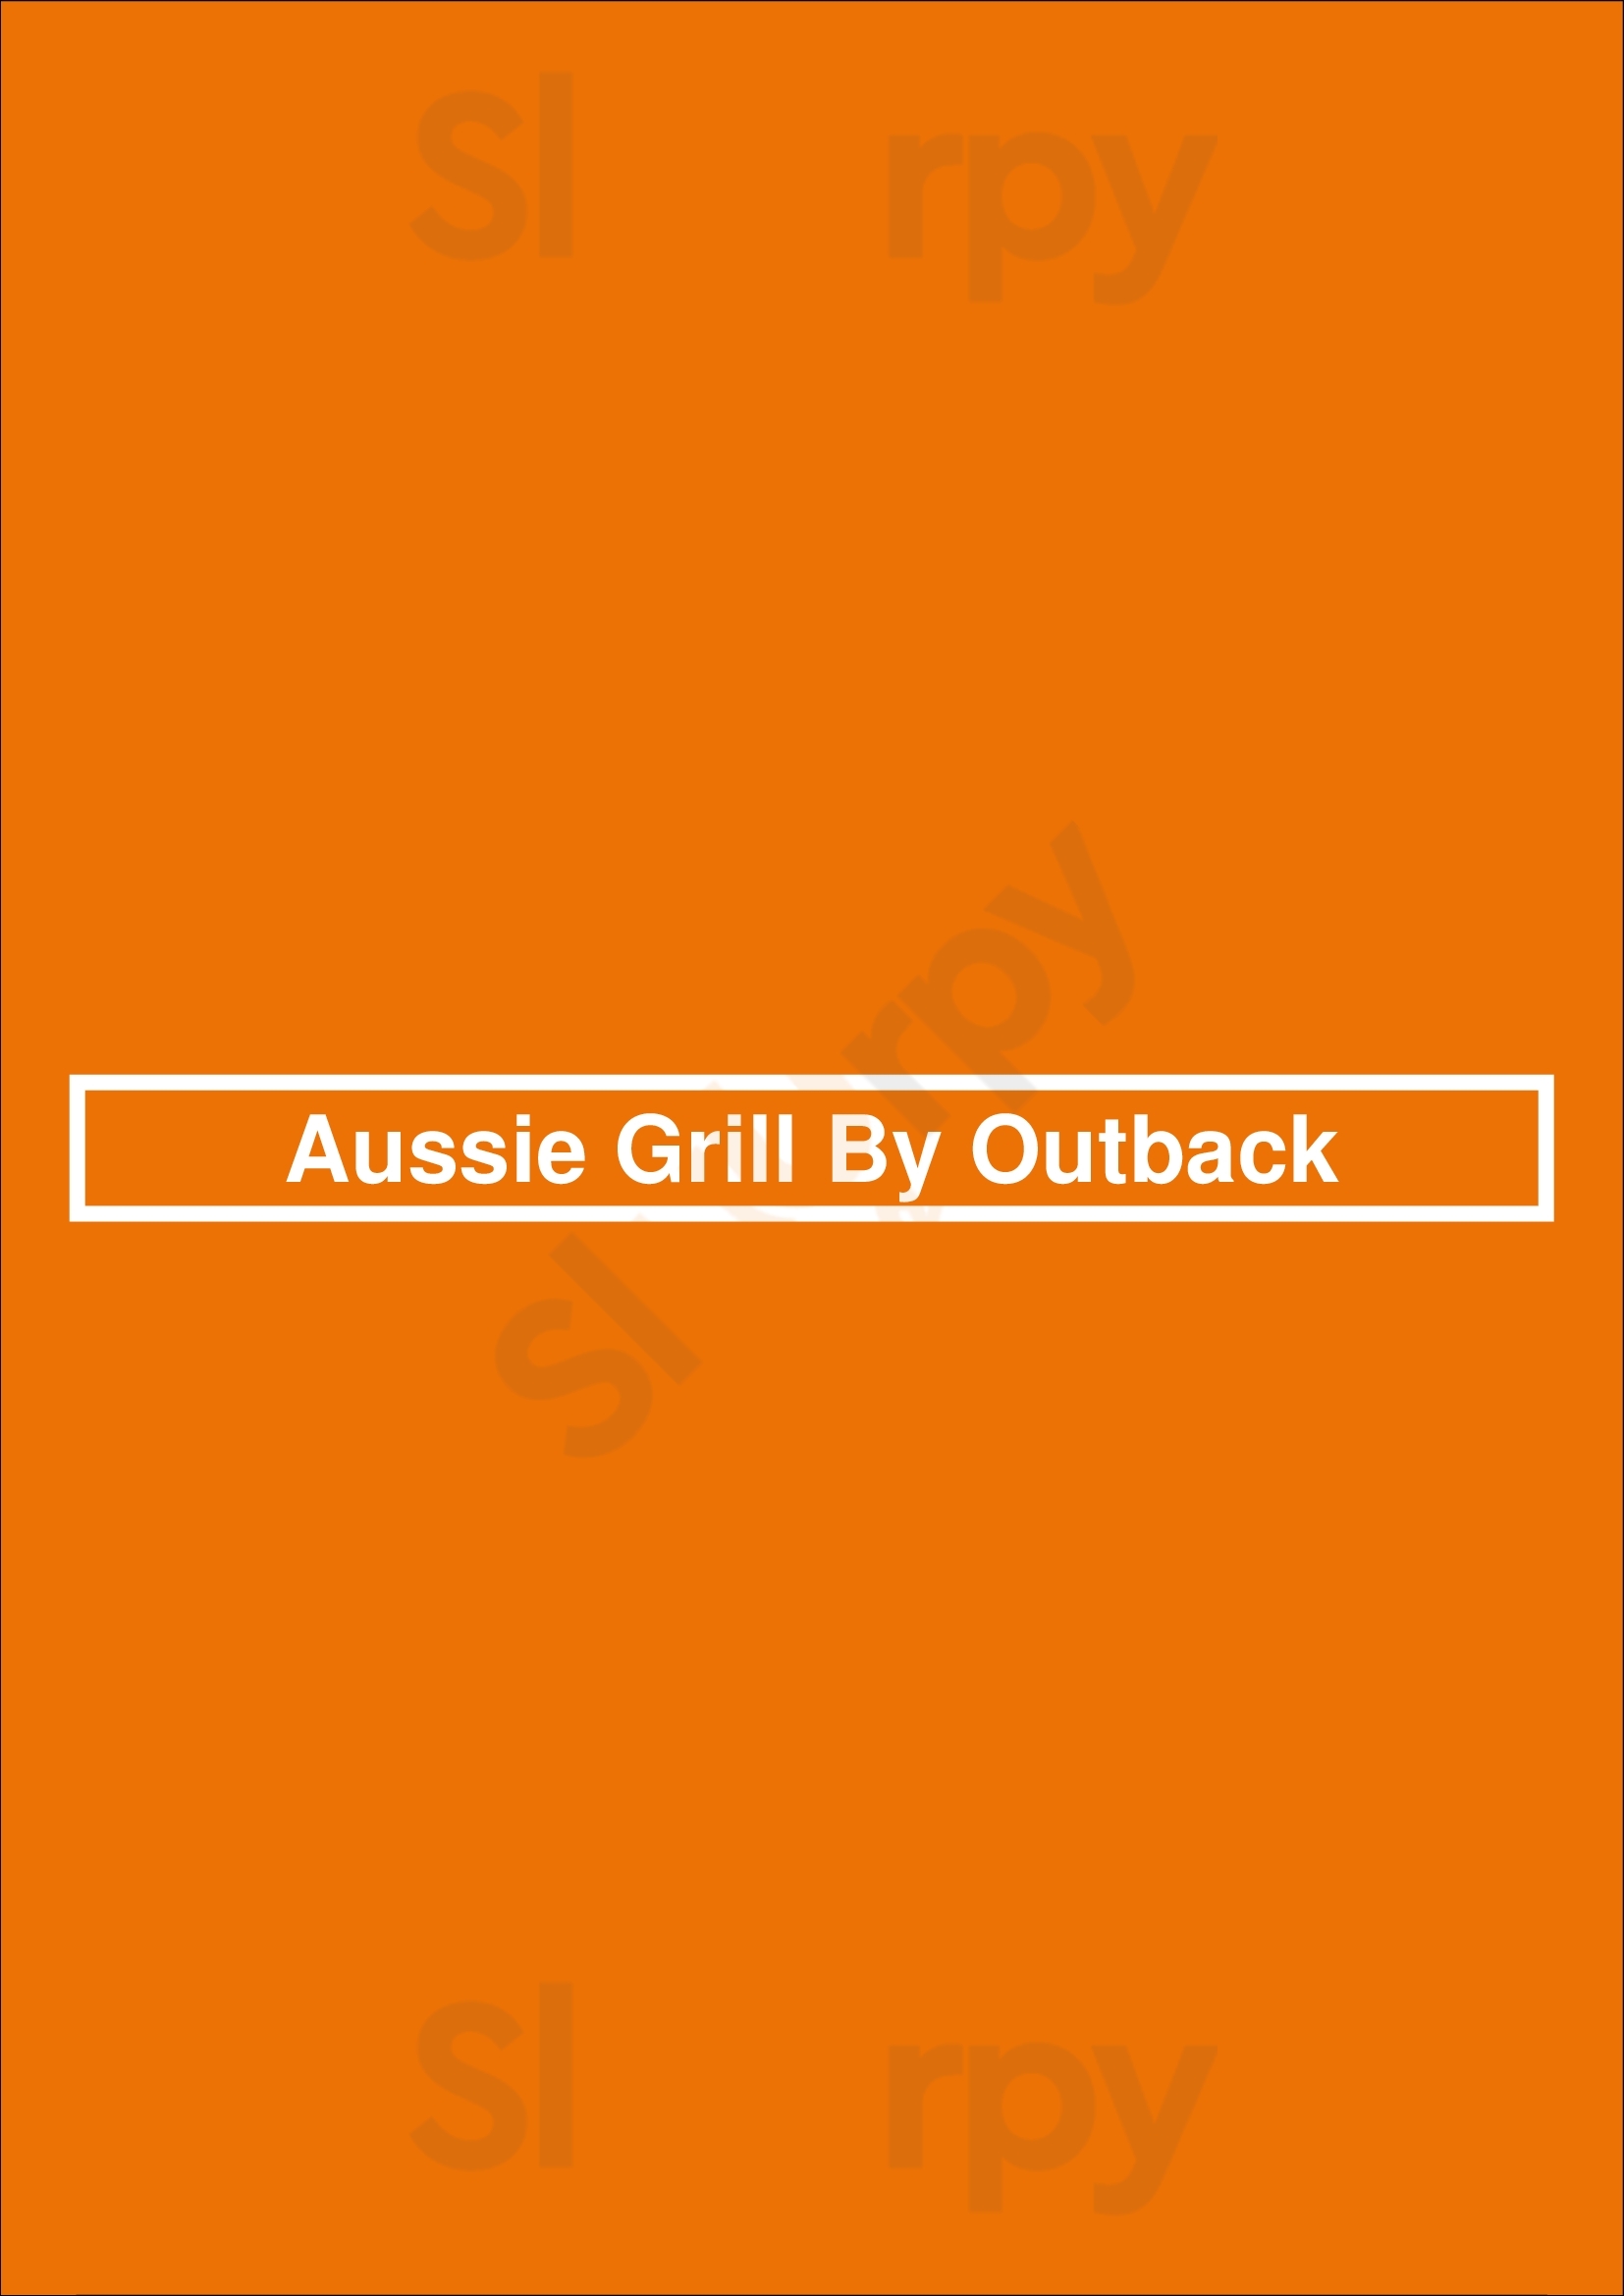 Aussie Grill By Outback Tampa Menu - 1